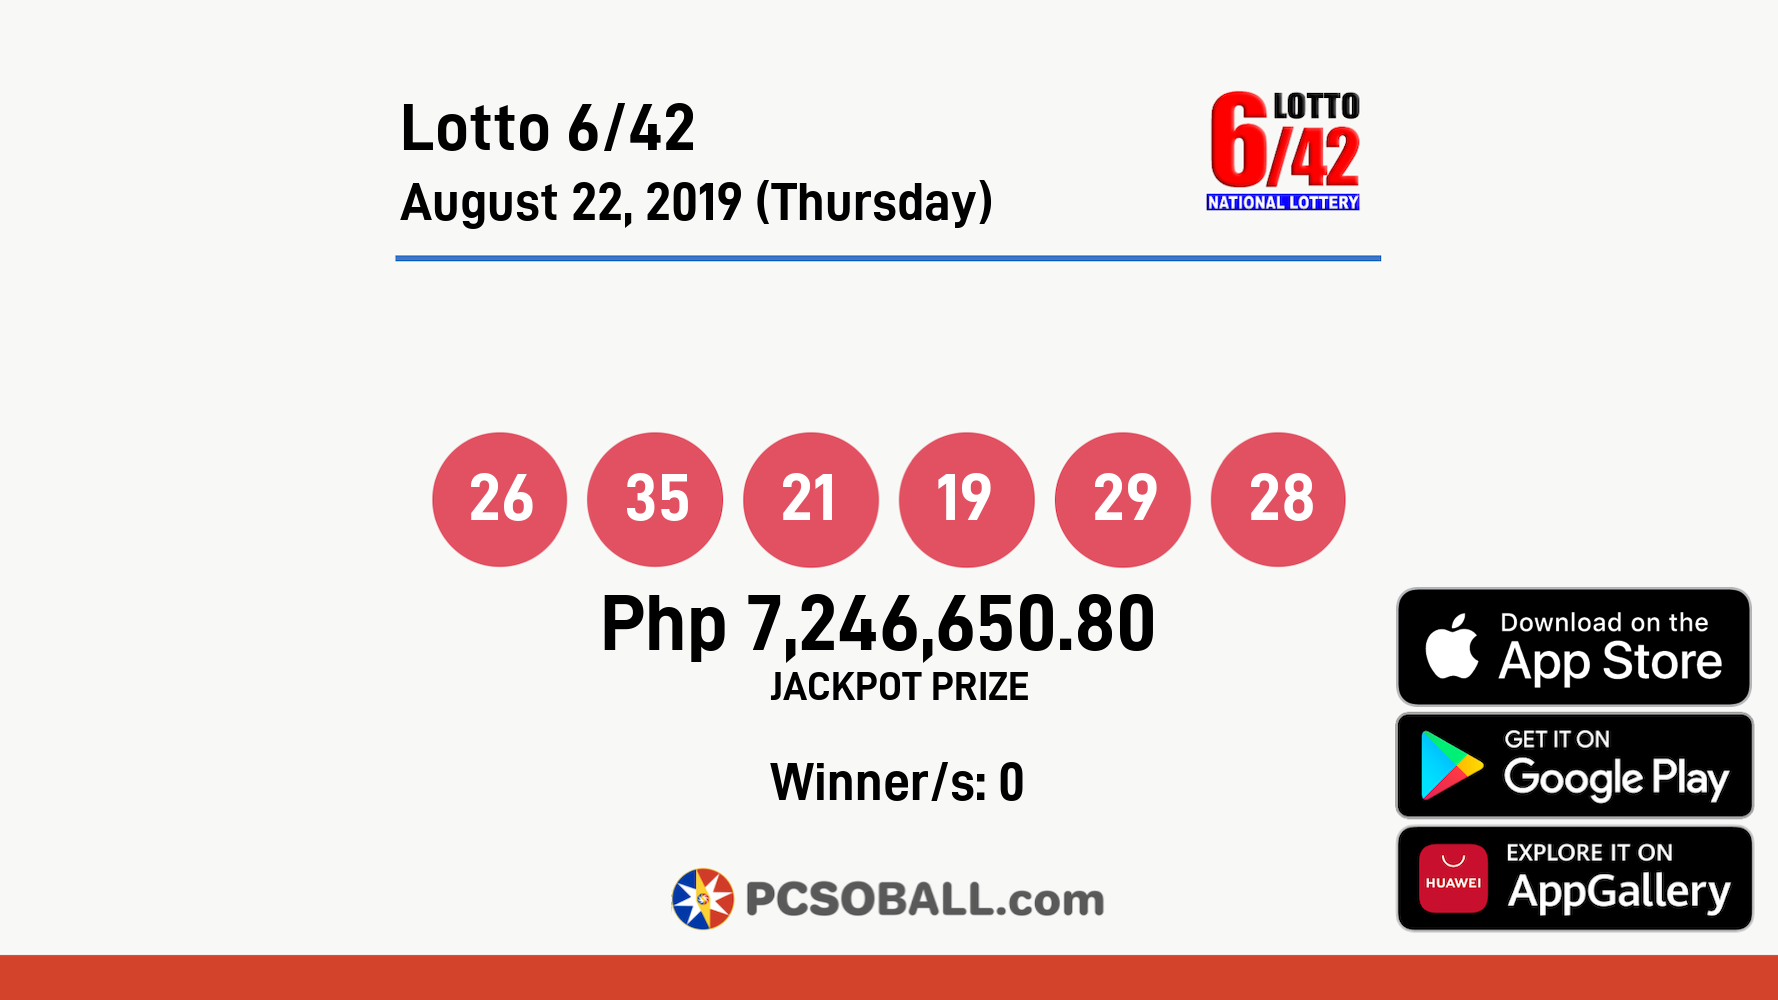 Lotto 6/42 August 22, 2019 (Thursday) Result